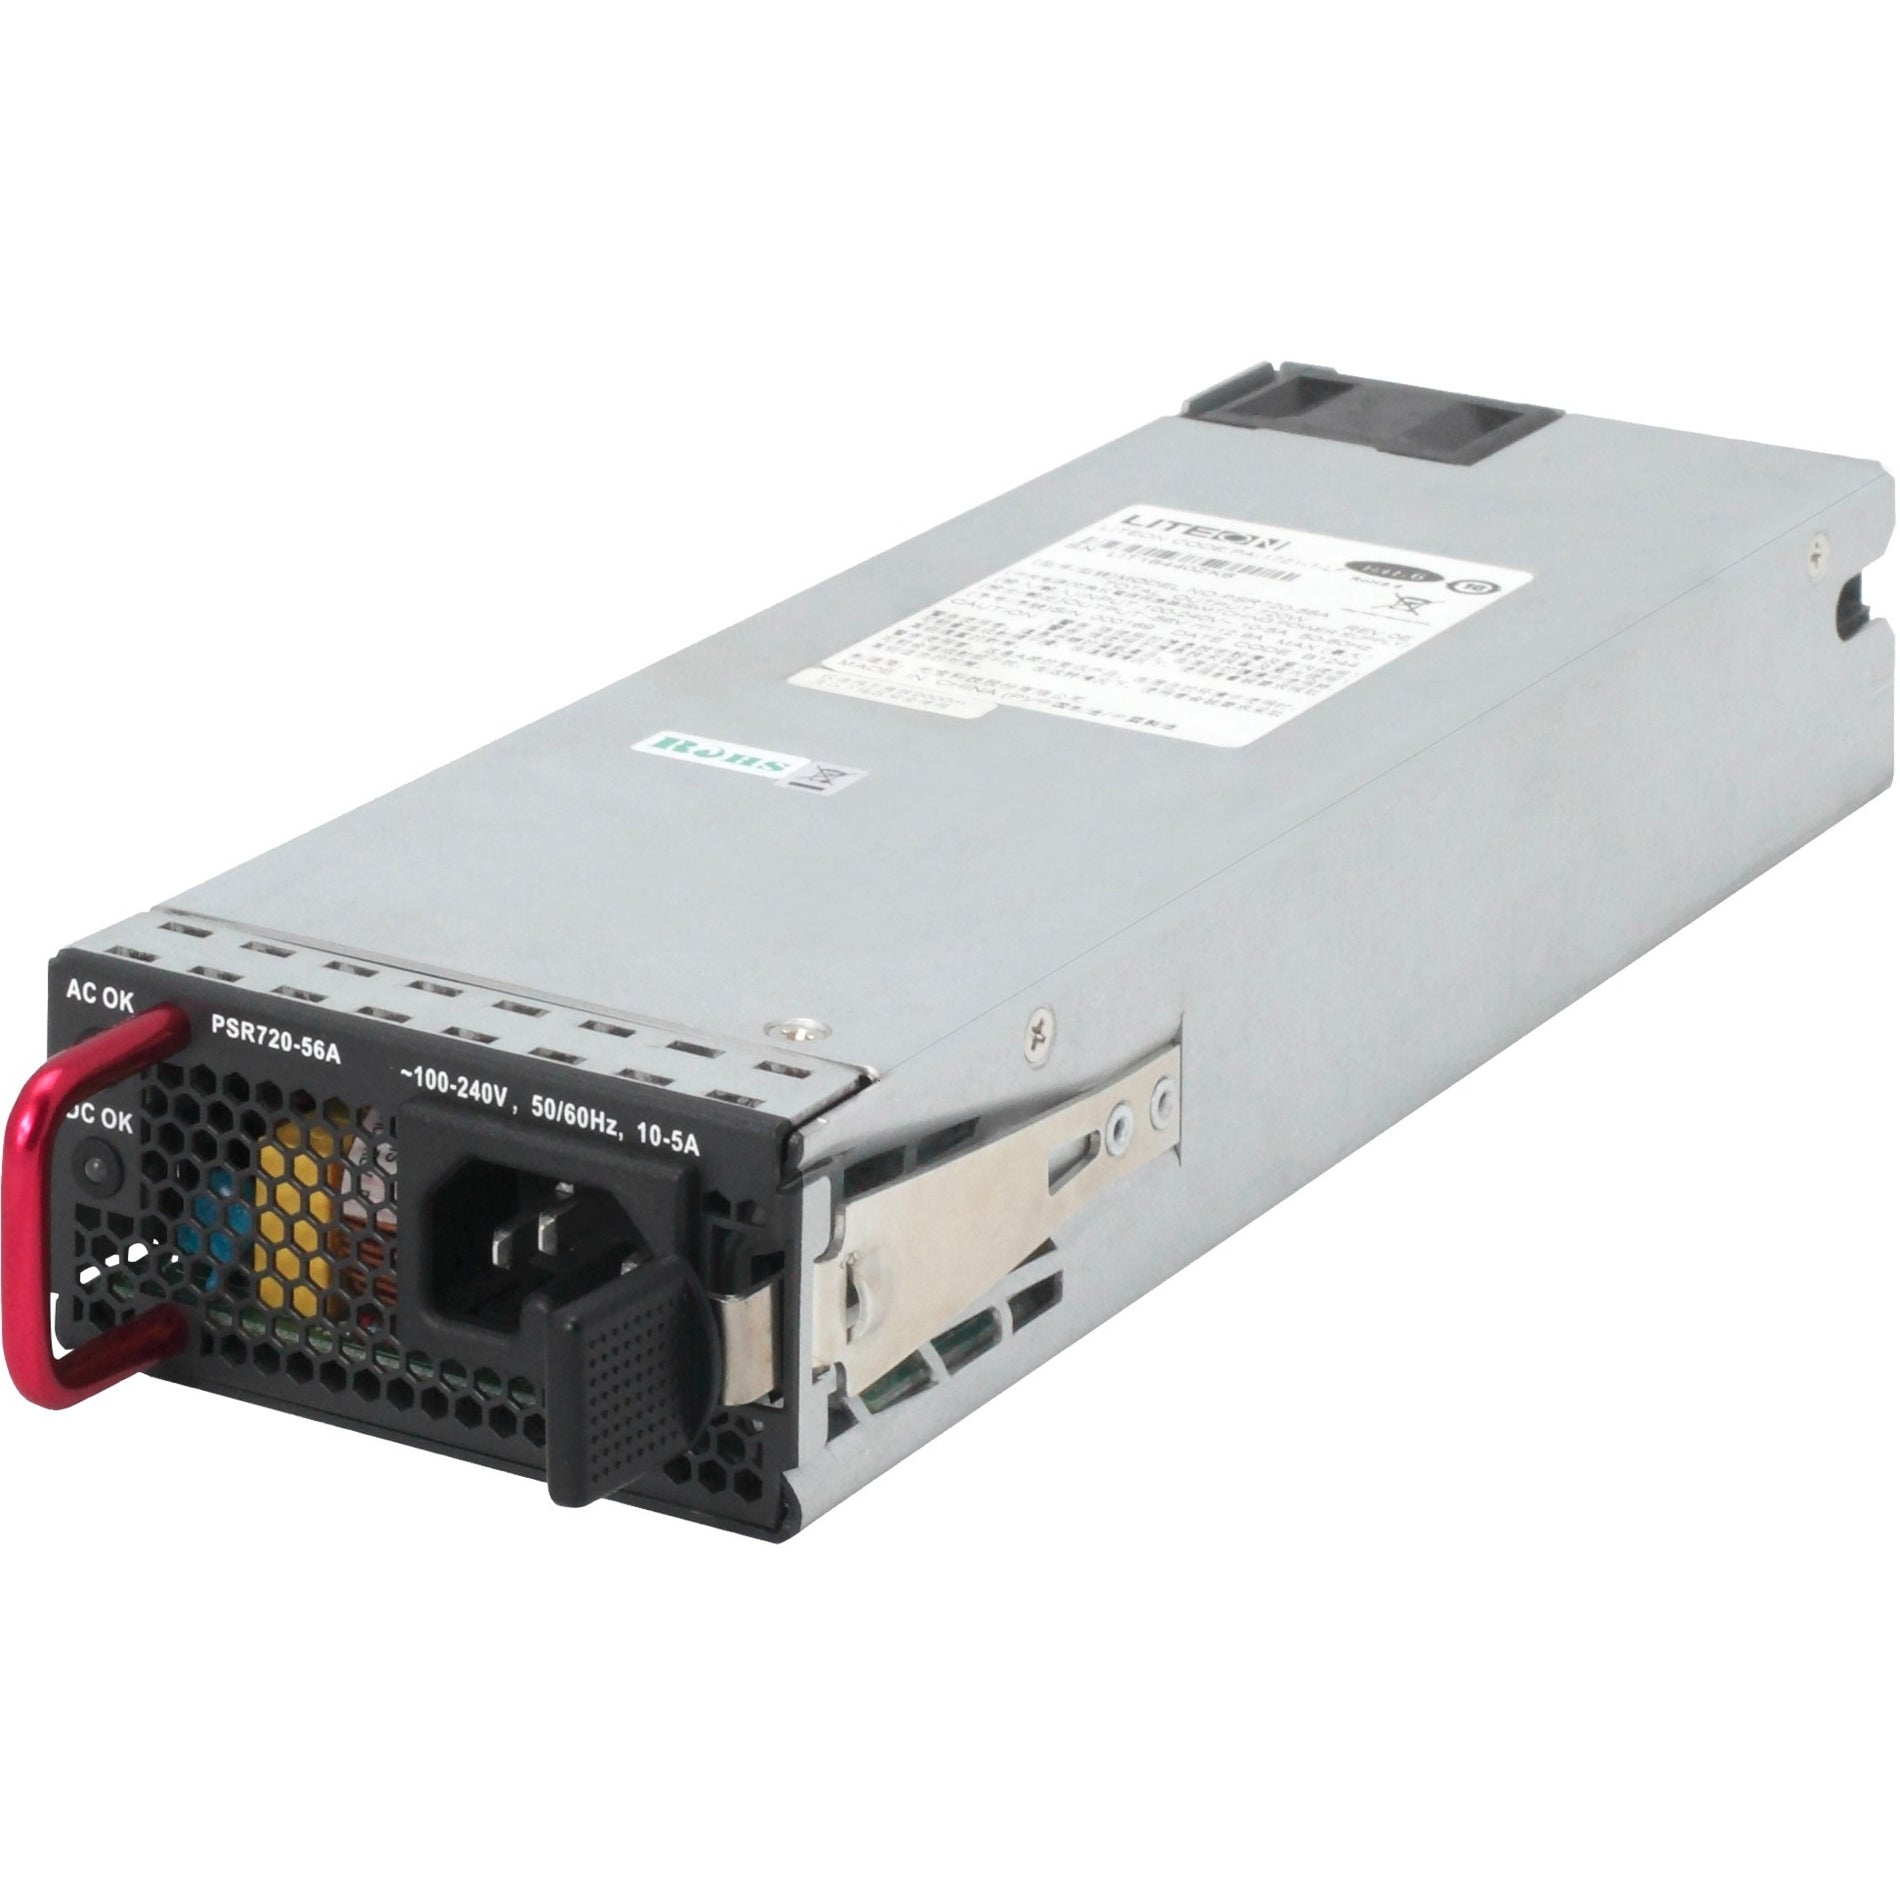 Aruba Power Module - 2750 W, Reliable Power Supply for Your Network Equipment